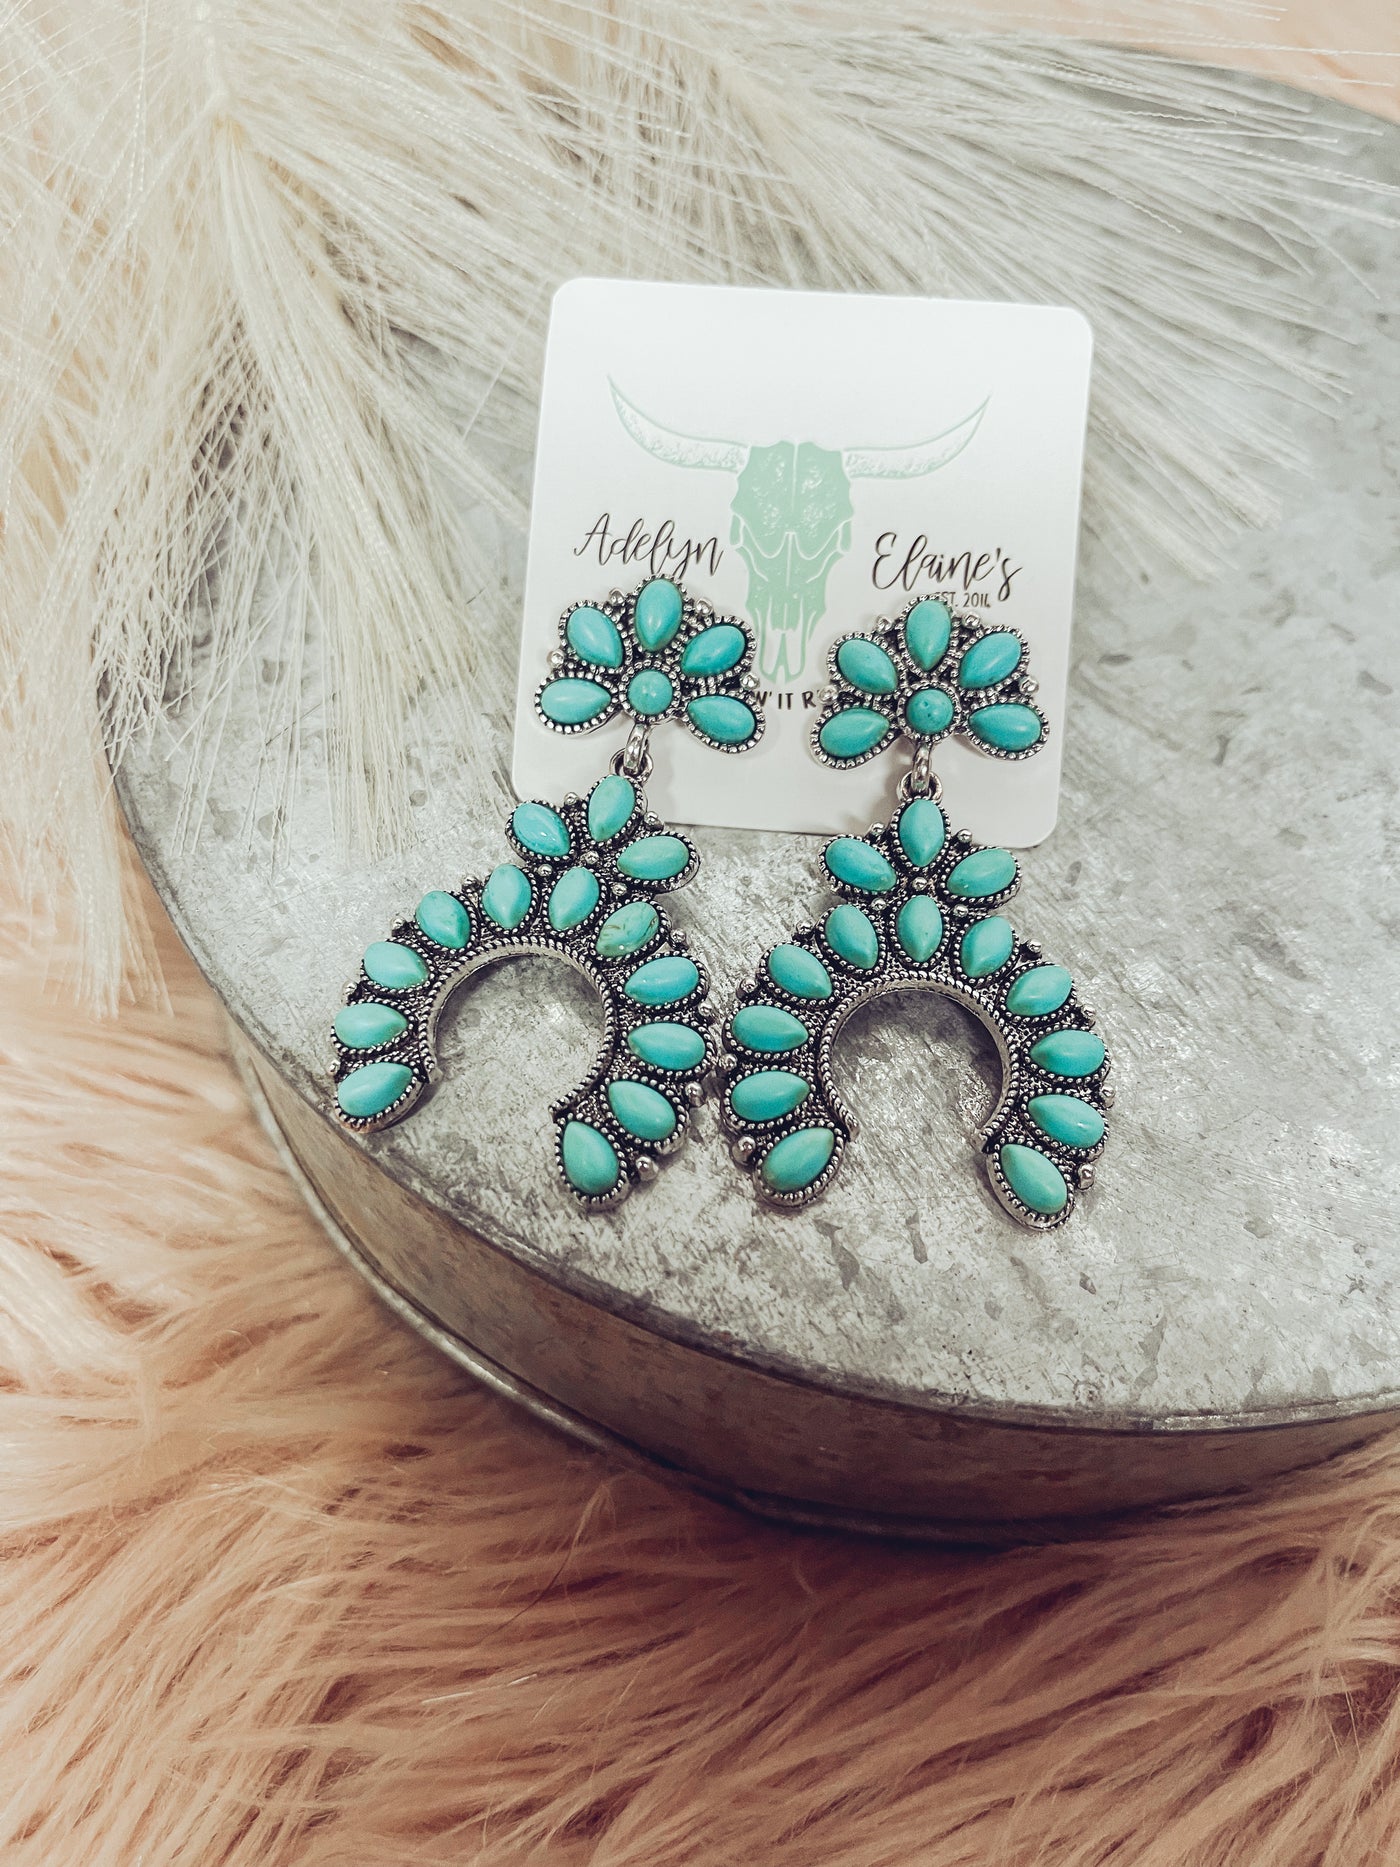 Blossom - Earrings-202 JEWELRY-J's World Trading - Harry Hines-Adelyn Elaine's Boutique, Women's Clothing Boutique in Gilmer, TX